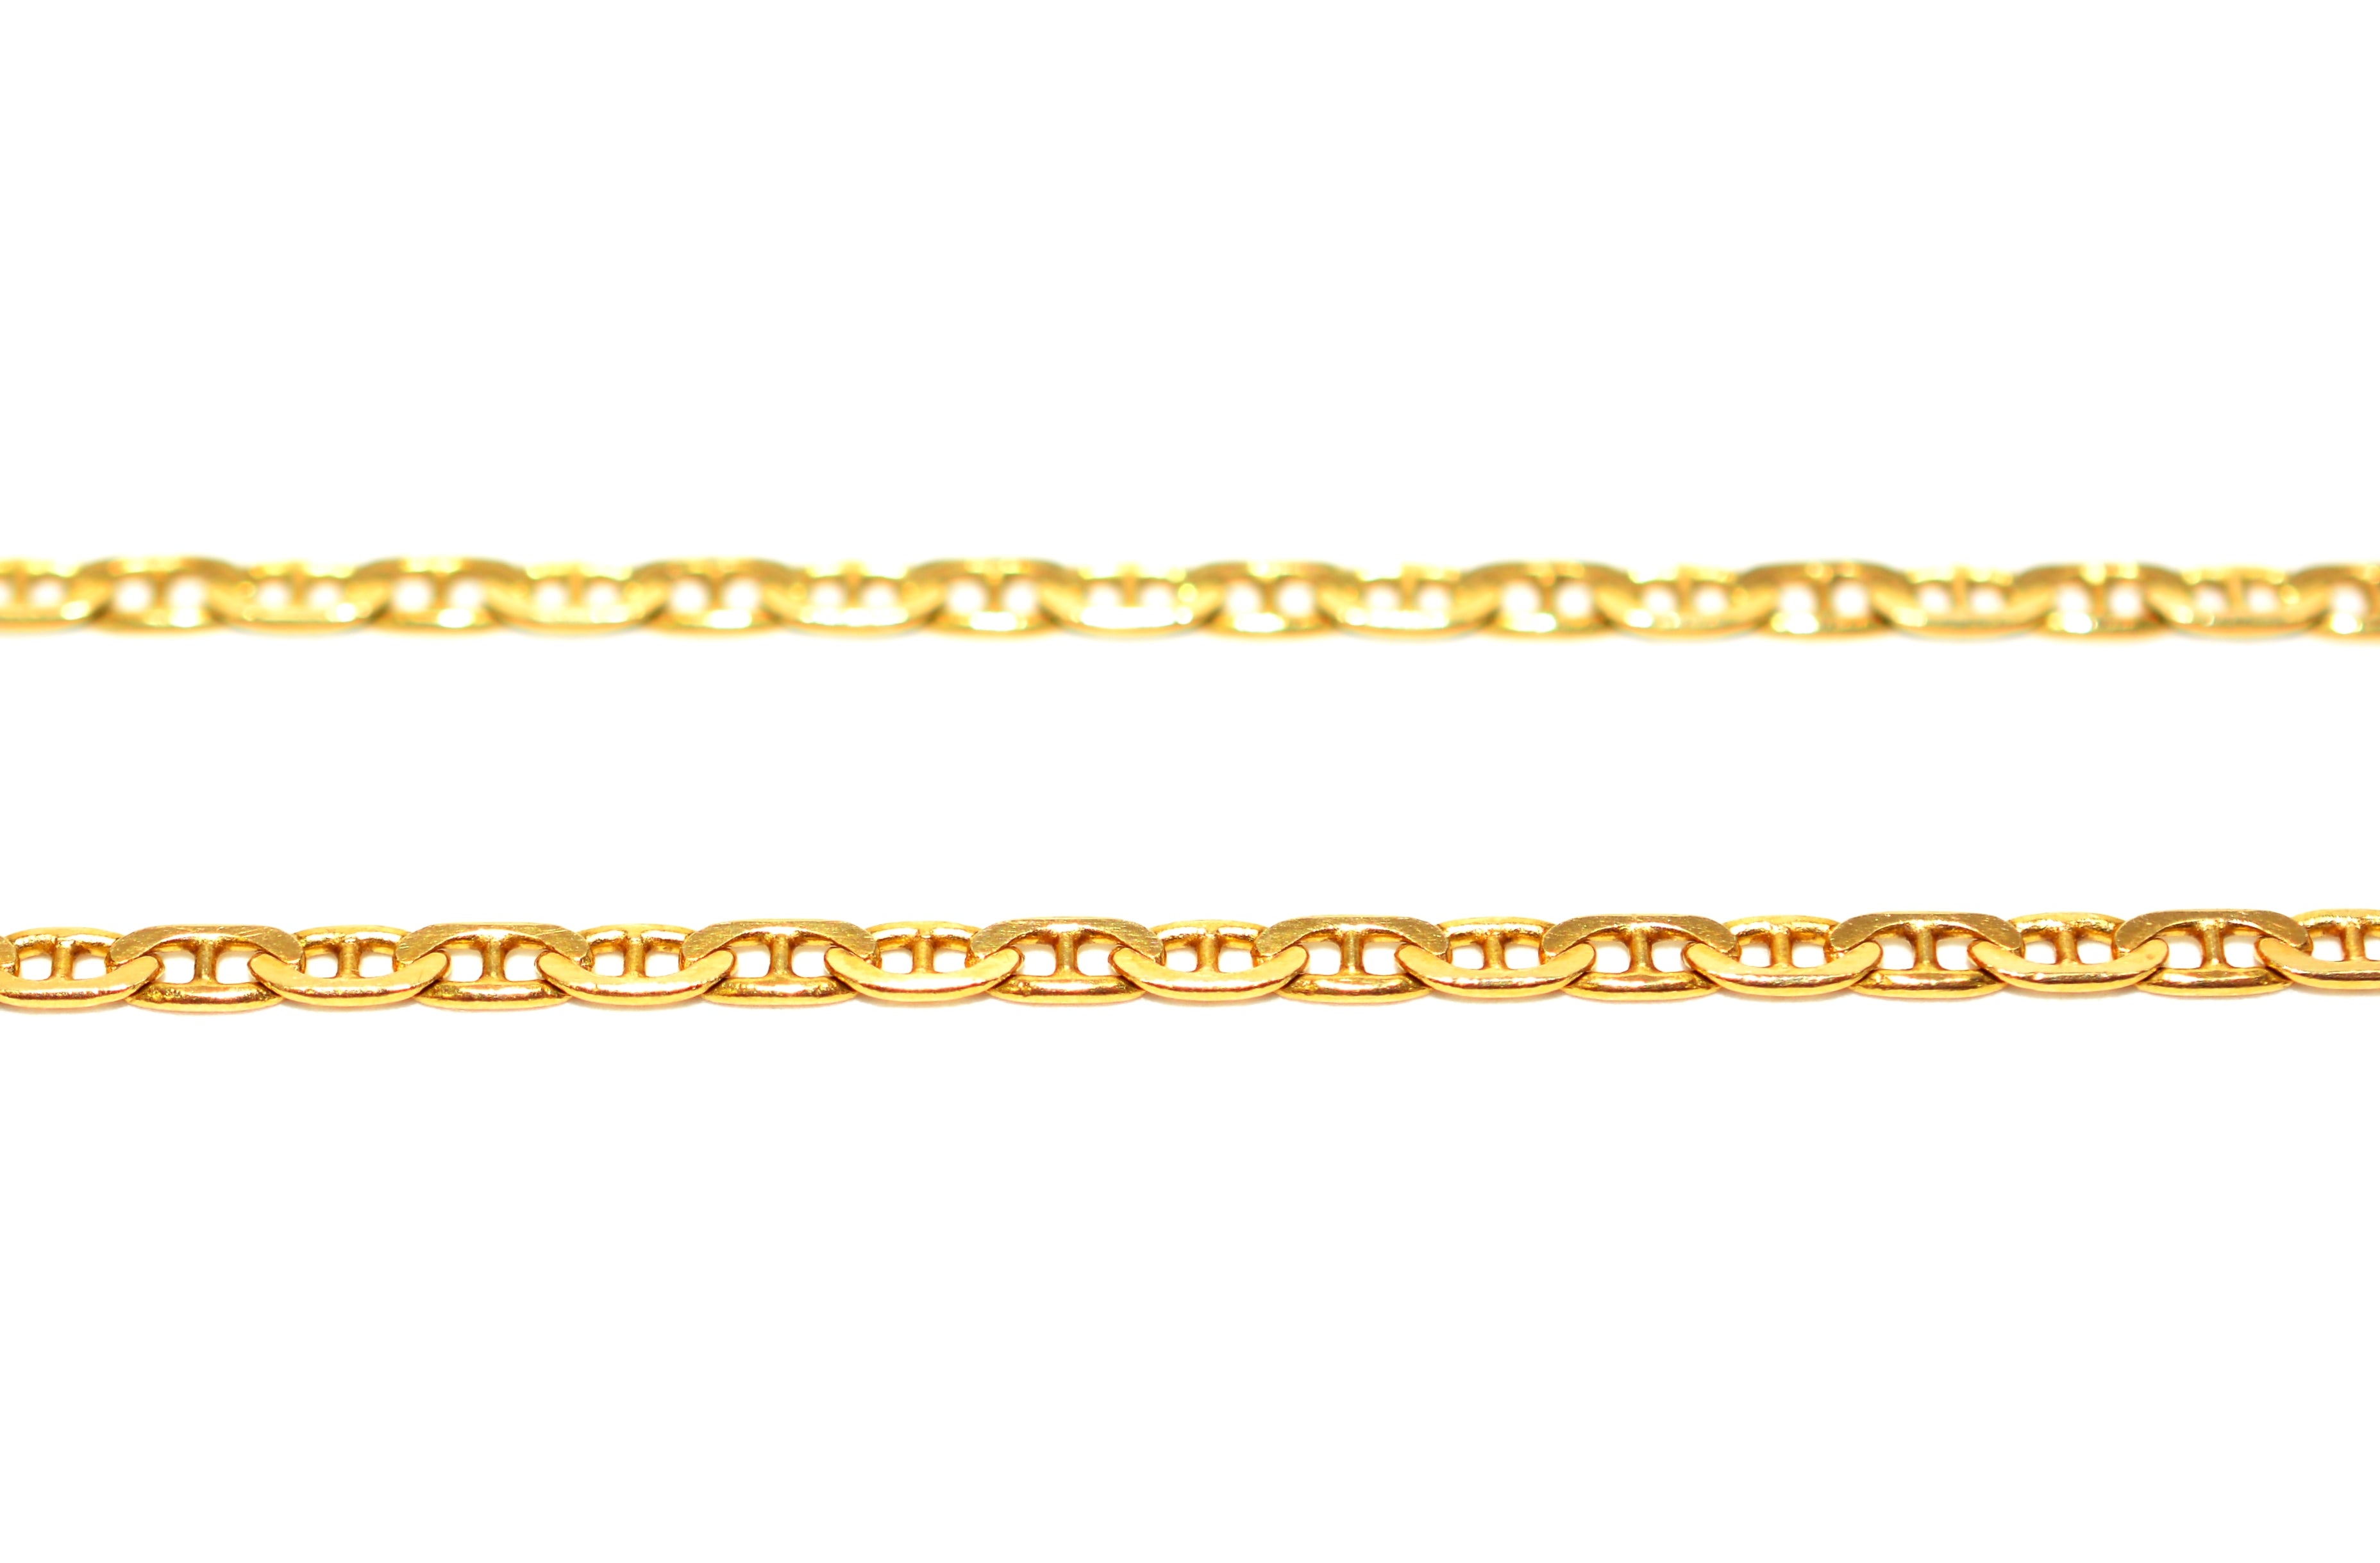 14K Solid Gold Mariner Chain Necklace 18" 3.3g 1.75mm Chain Gold Chain Vintage Jewelry Unisex Estate Jewelry Fine Jewelry Fine Jewellery